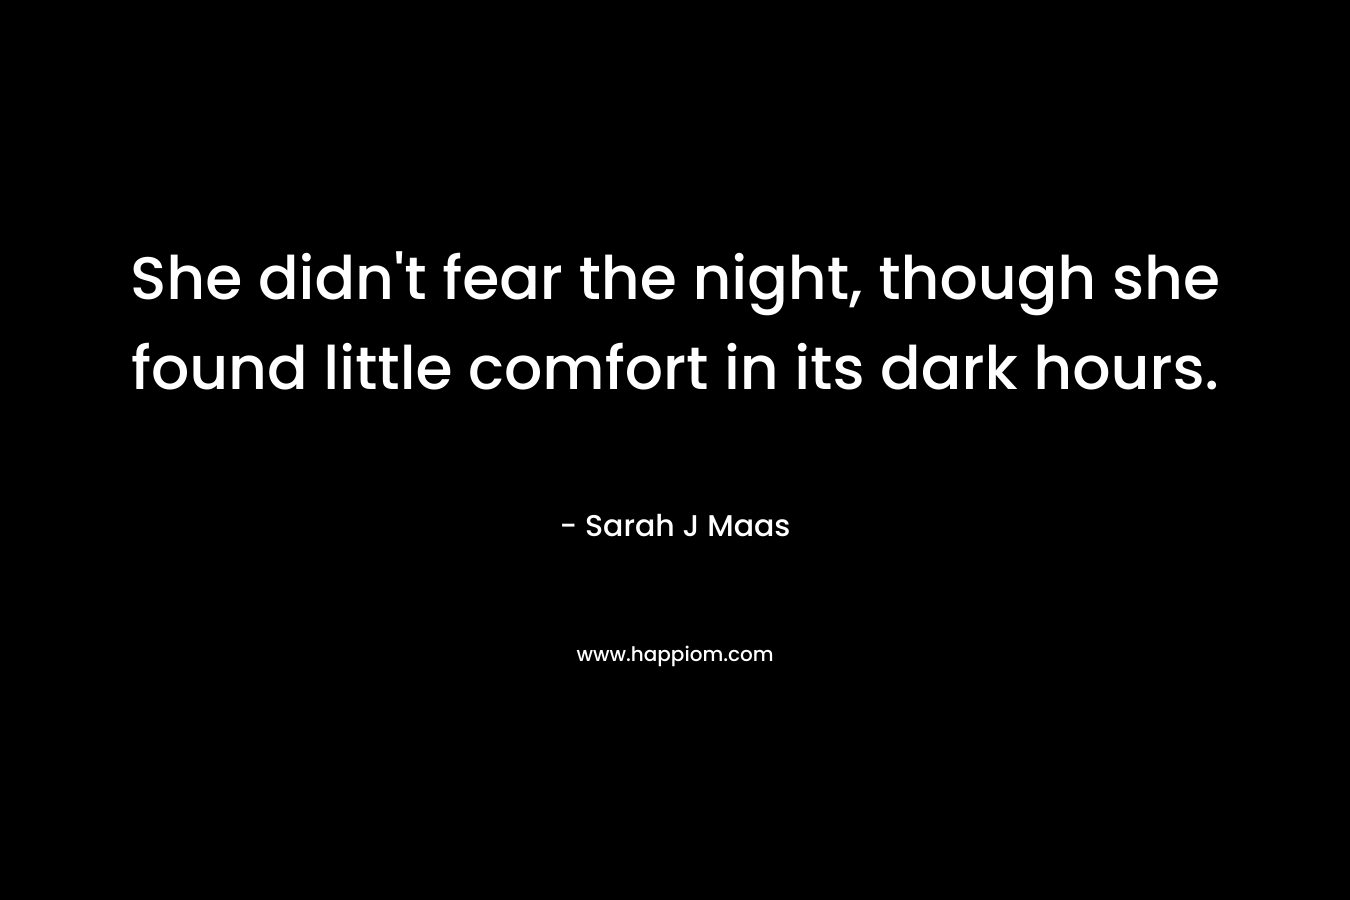 She didn’t fear the night, though she found little comfort in its dark hours. – Sarah J Maas